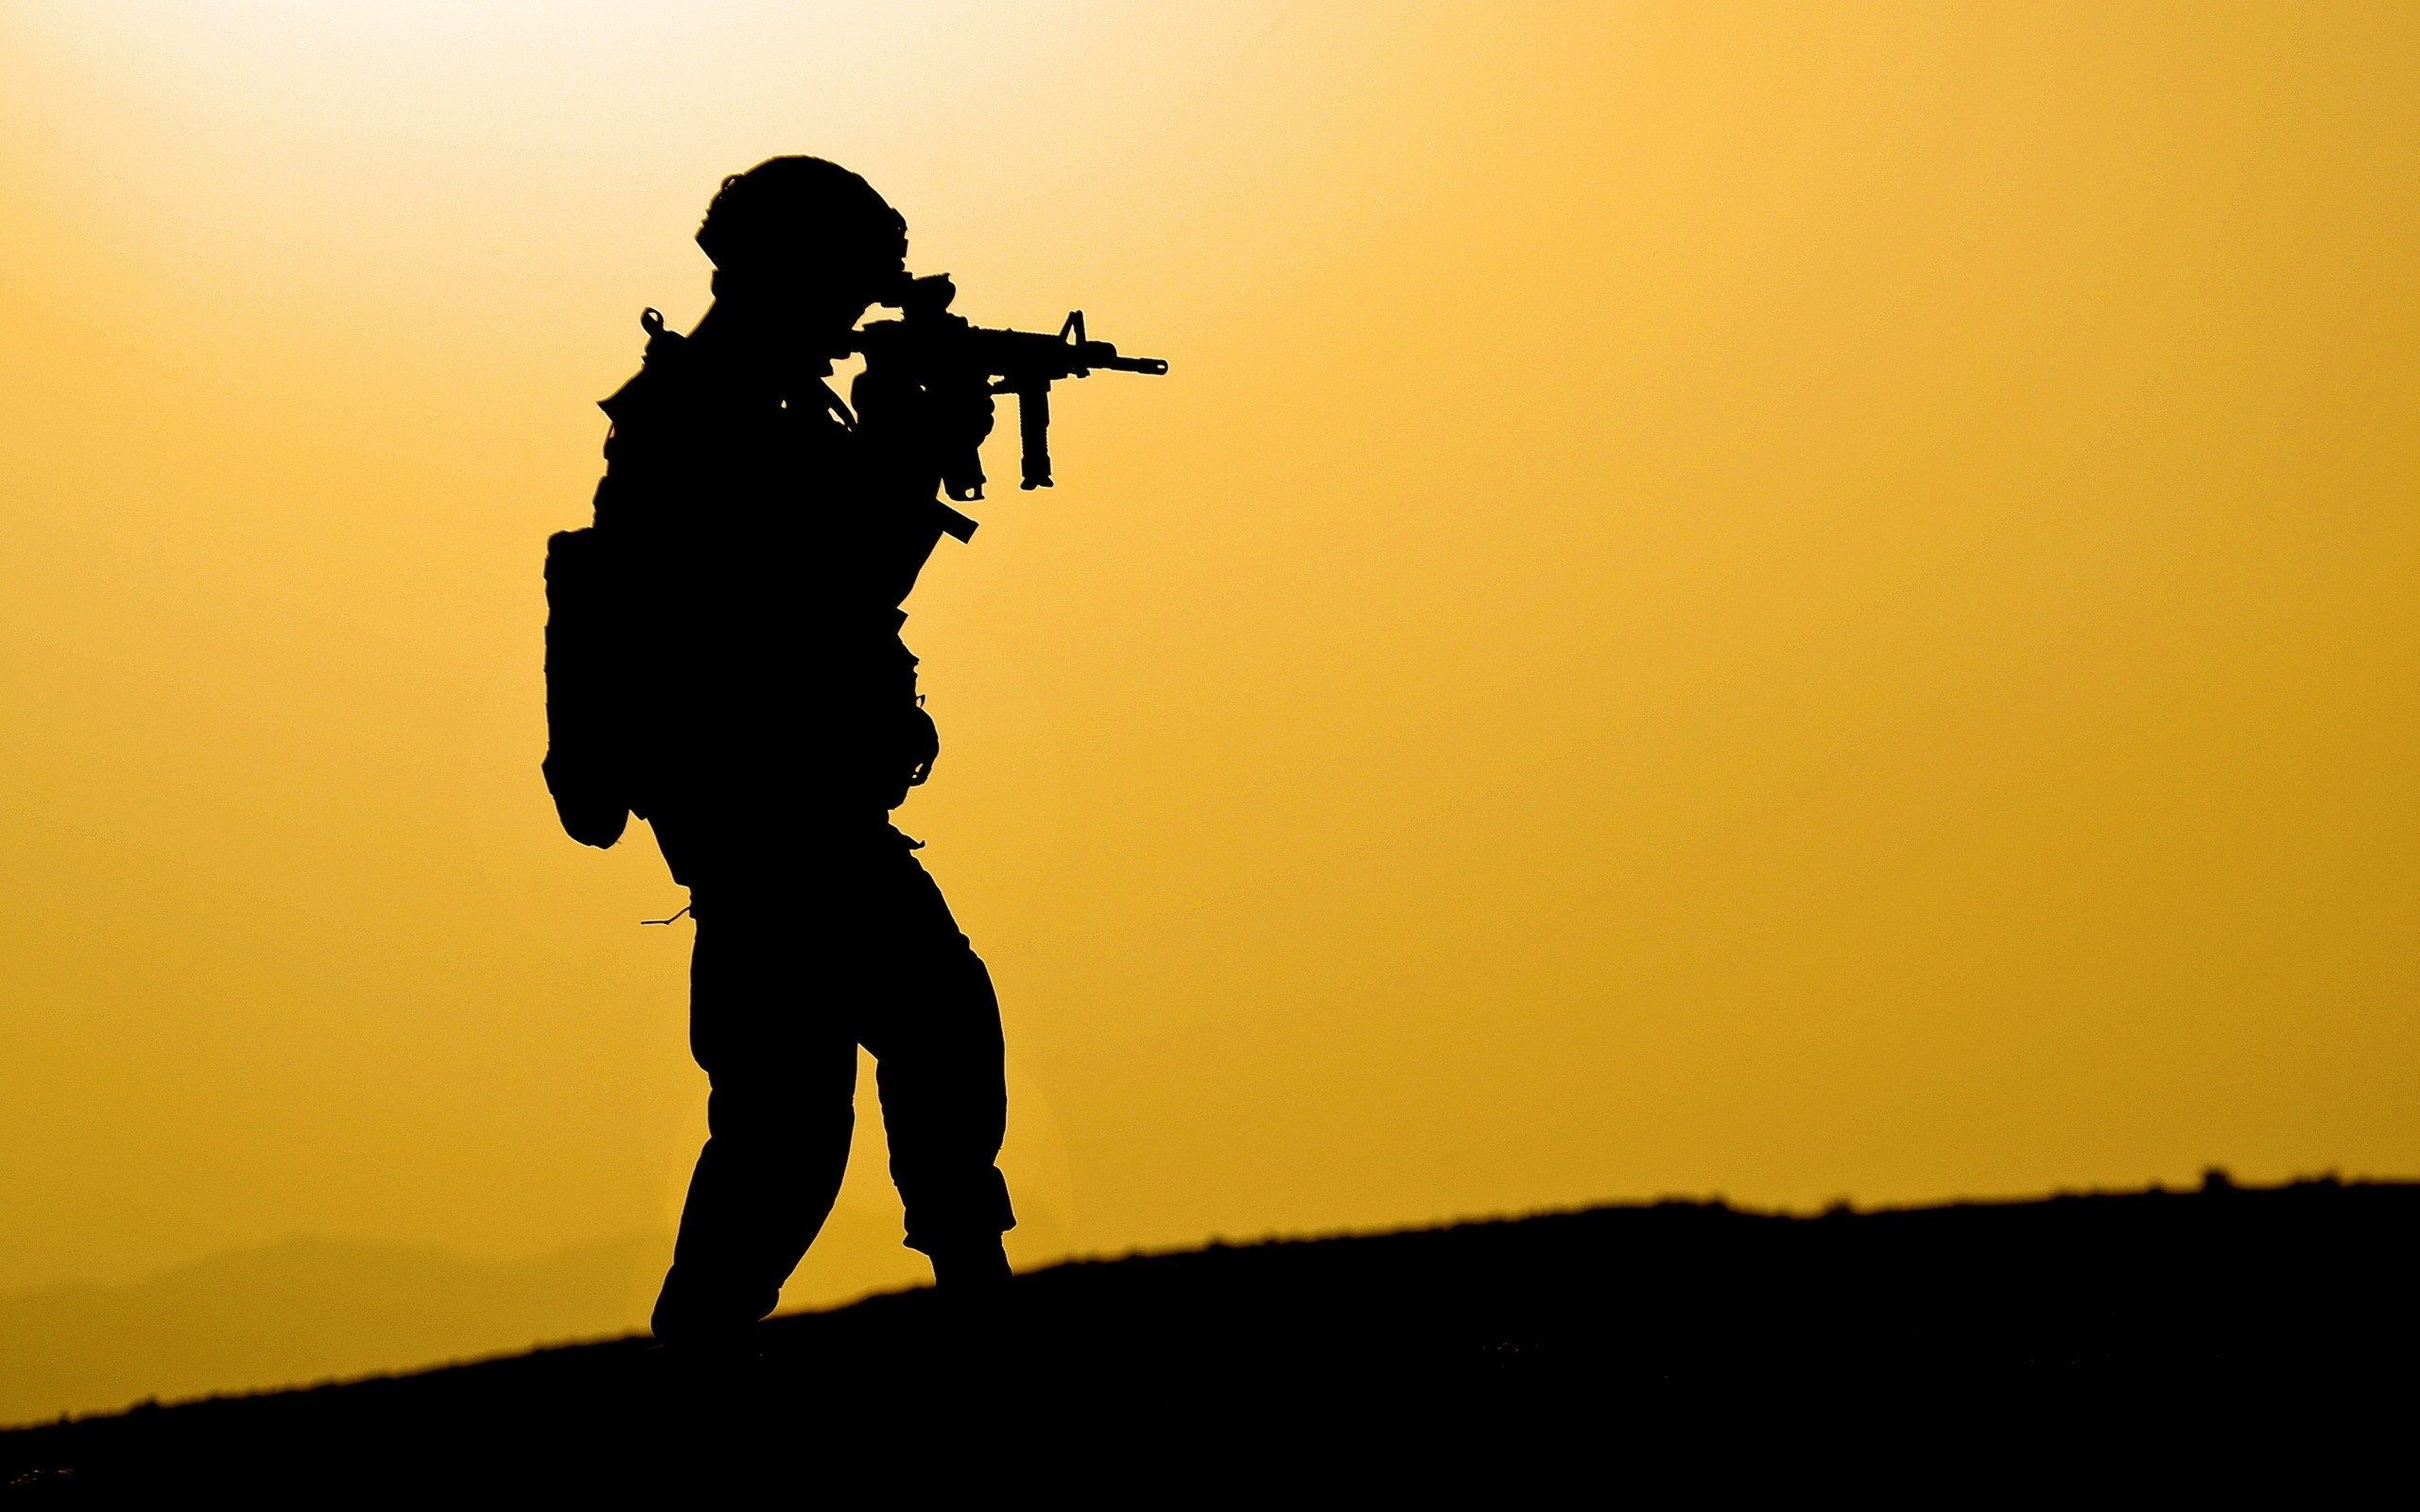 soldier Wallpaper Background. Soldier silhouette, Army soldier, Army image